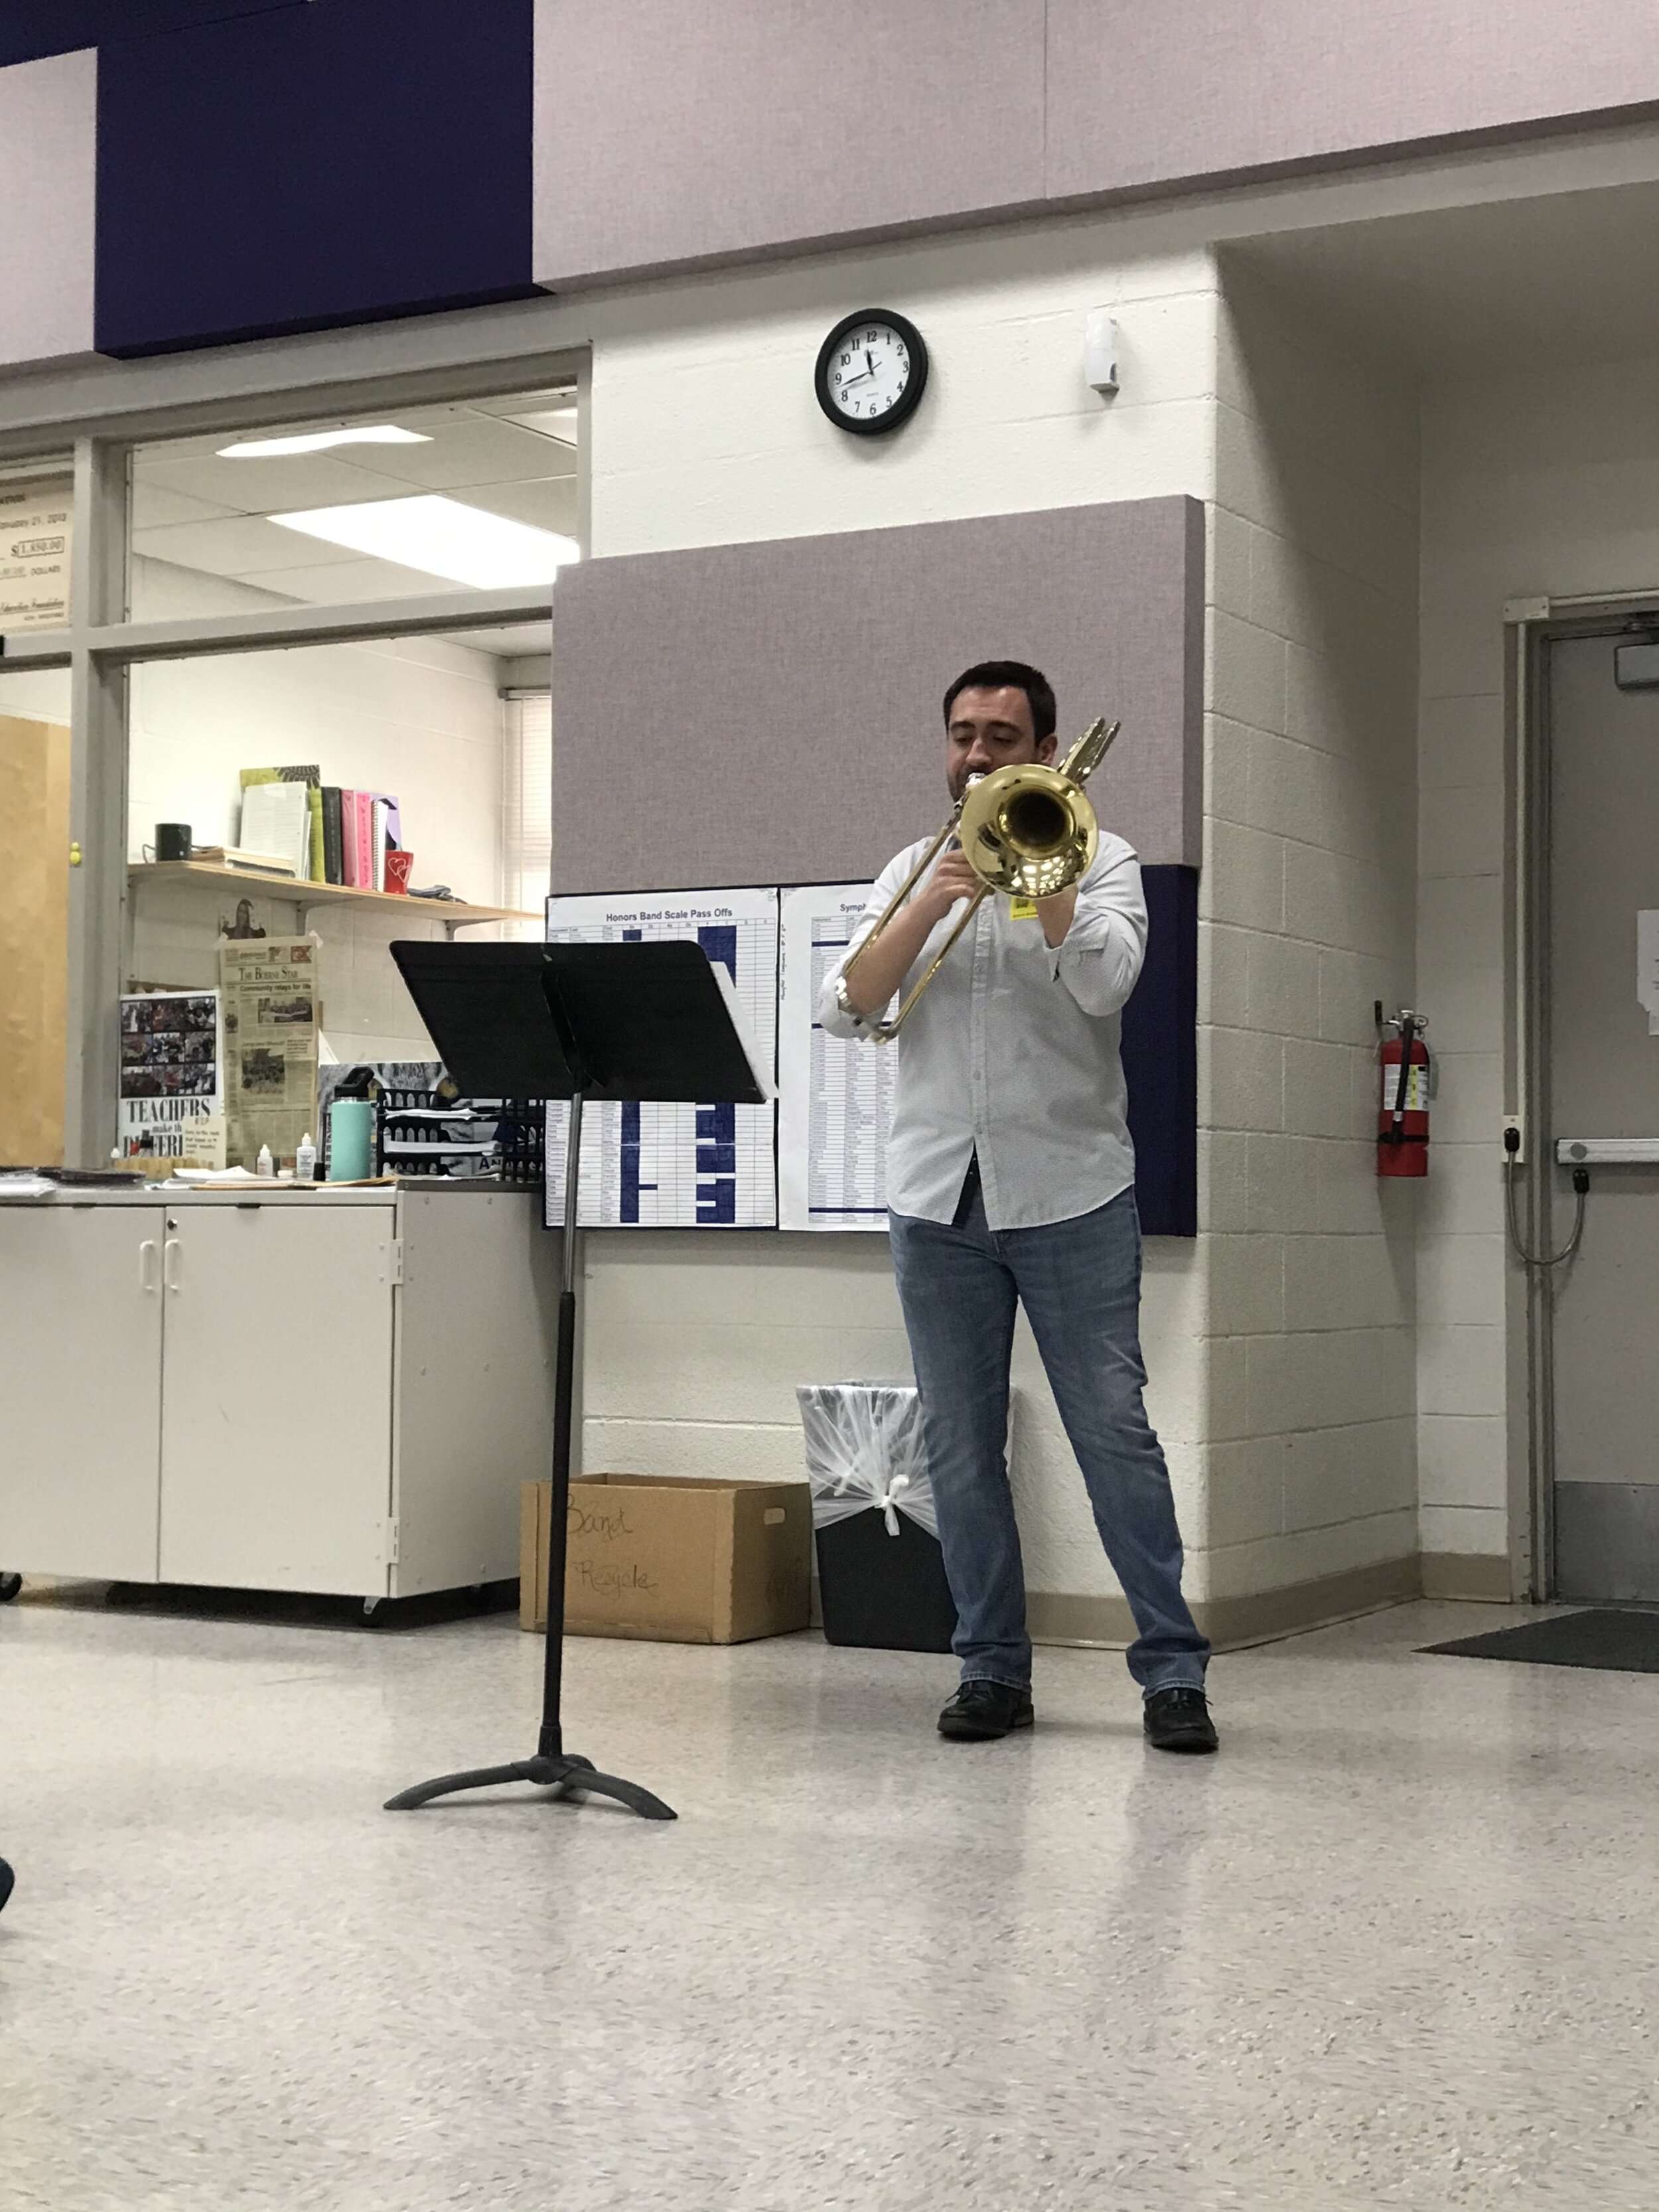 Performance at Boerne MS North